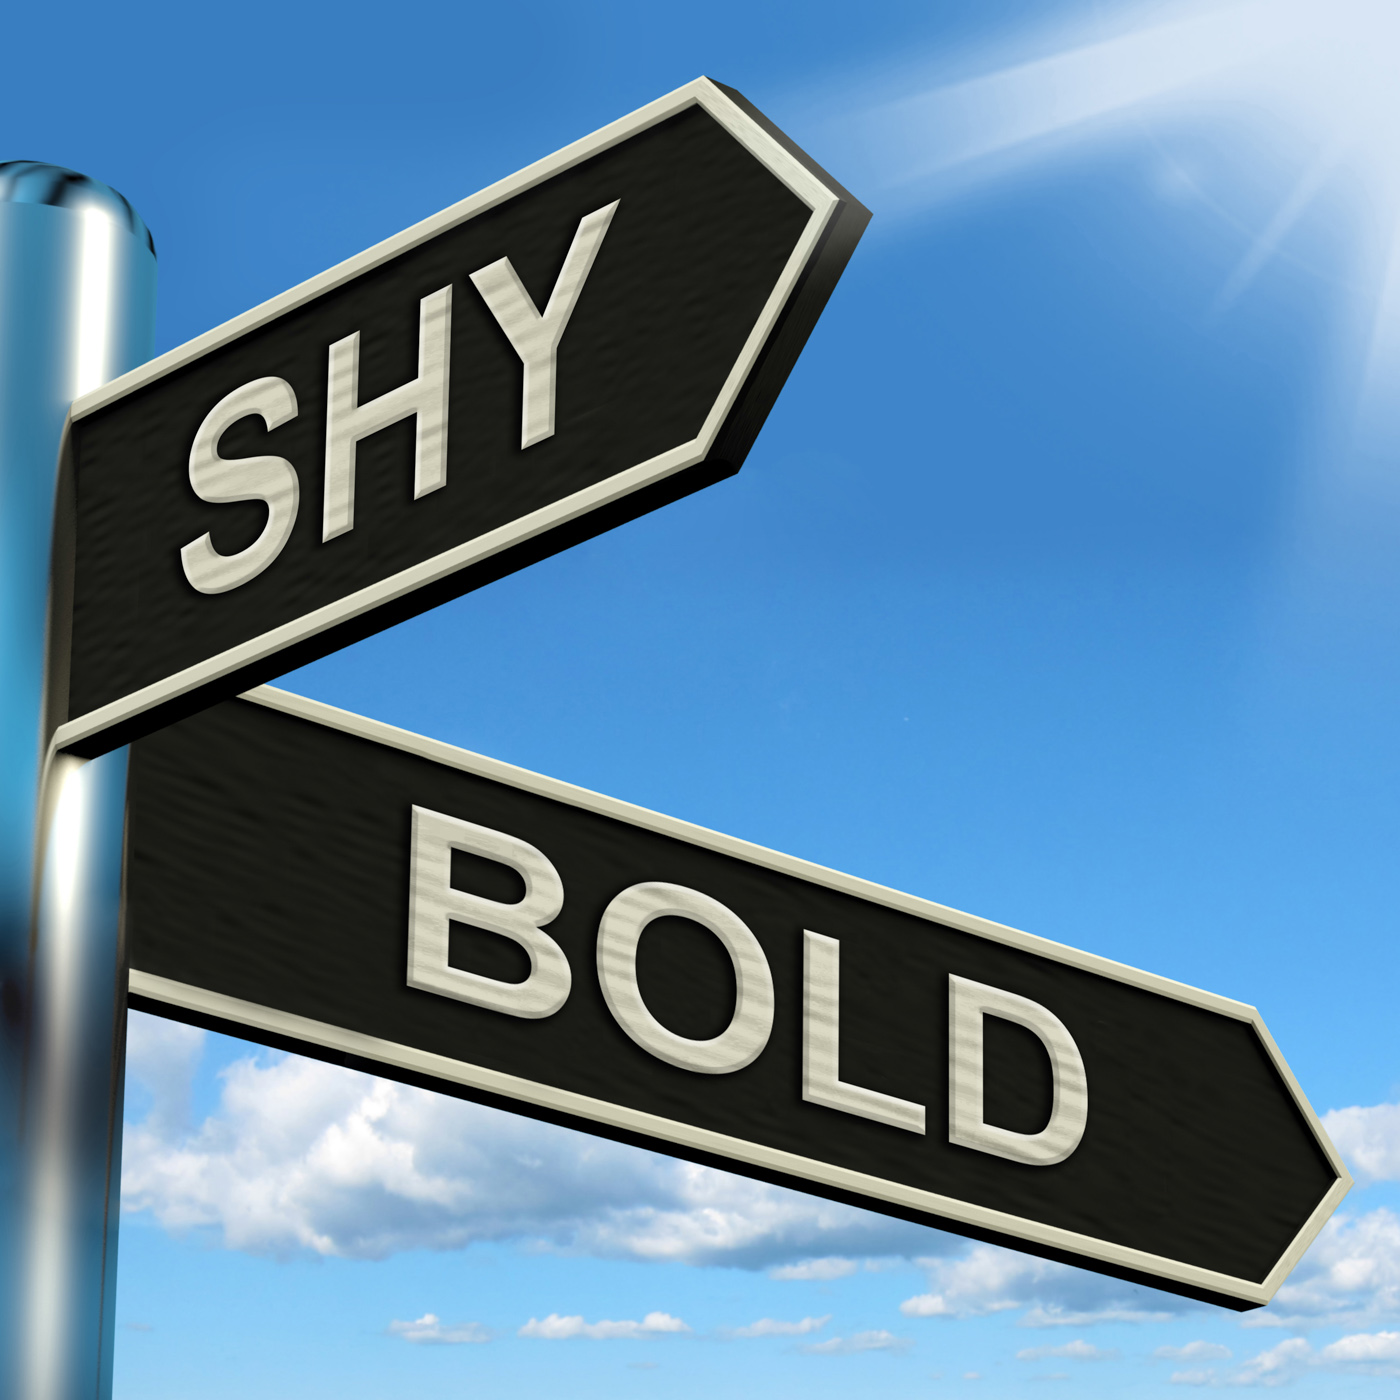 Shy Bold Signpost Means Introvert Or Extrovert, Bold, Cautious, Confident, Daring, HQ Photo